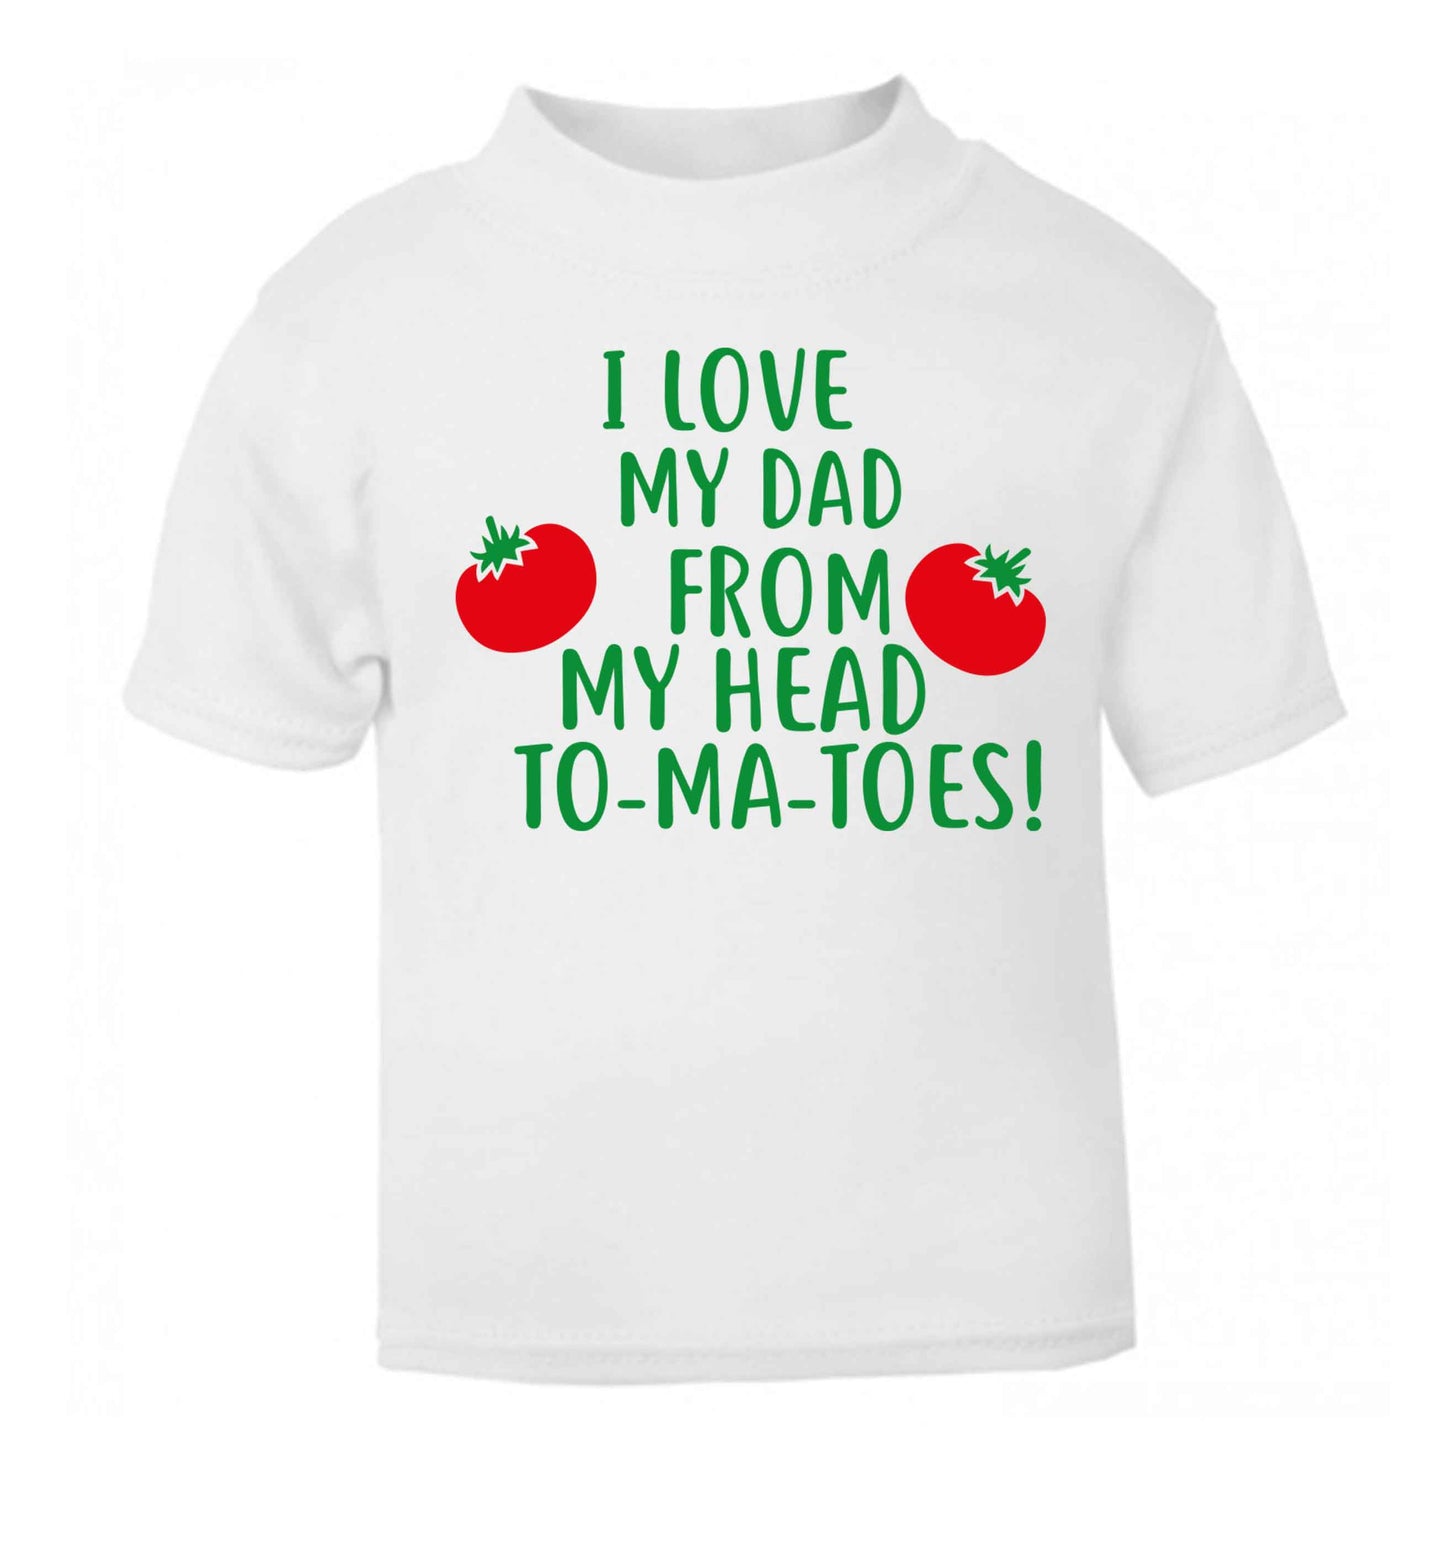 I love my dad from my head to-ma-toes white baby toddler Tshirt 2 Years